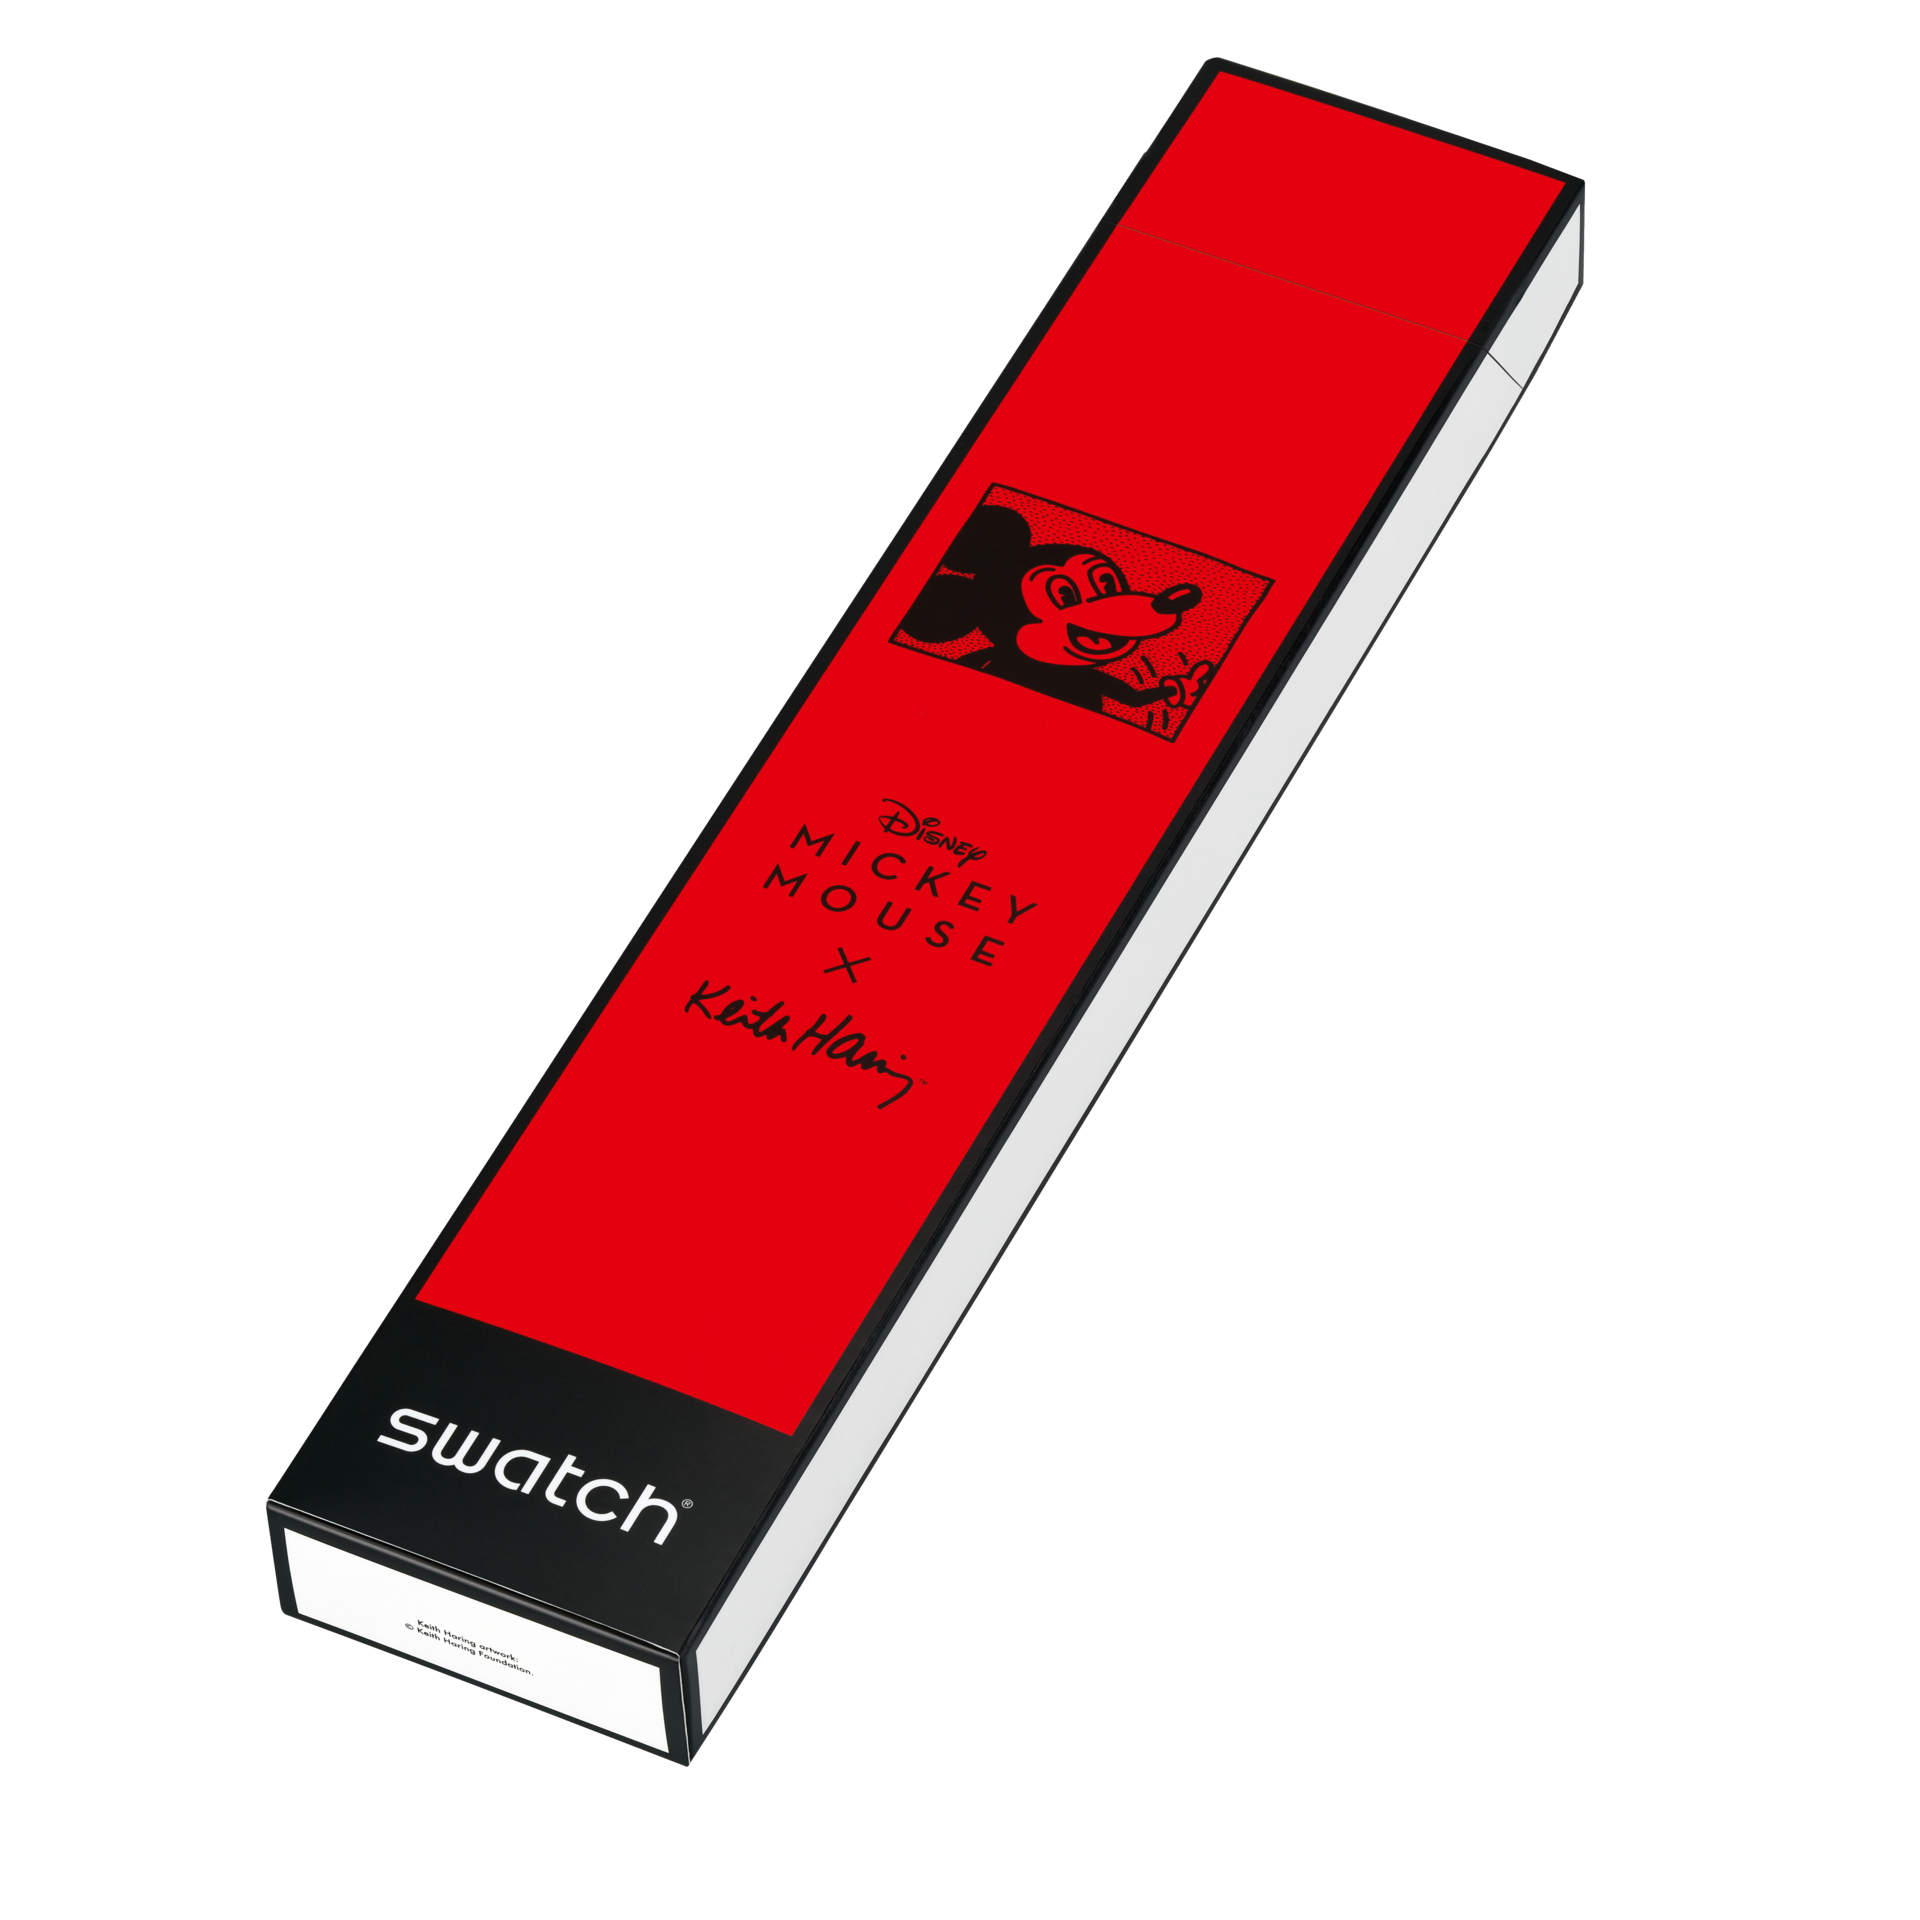 Swatch Mouse Trap 2004年モデル GS120-